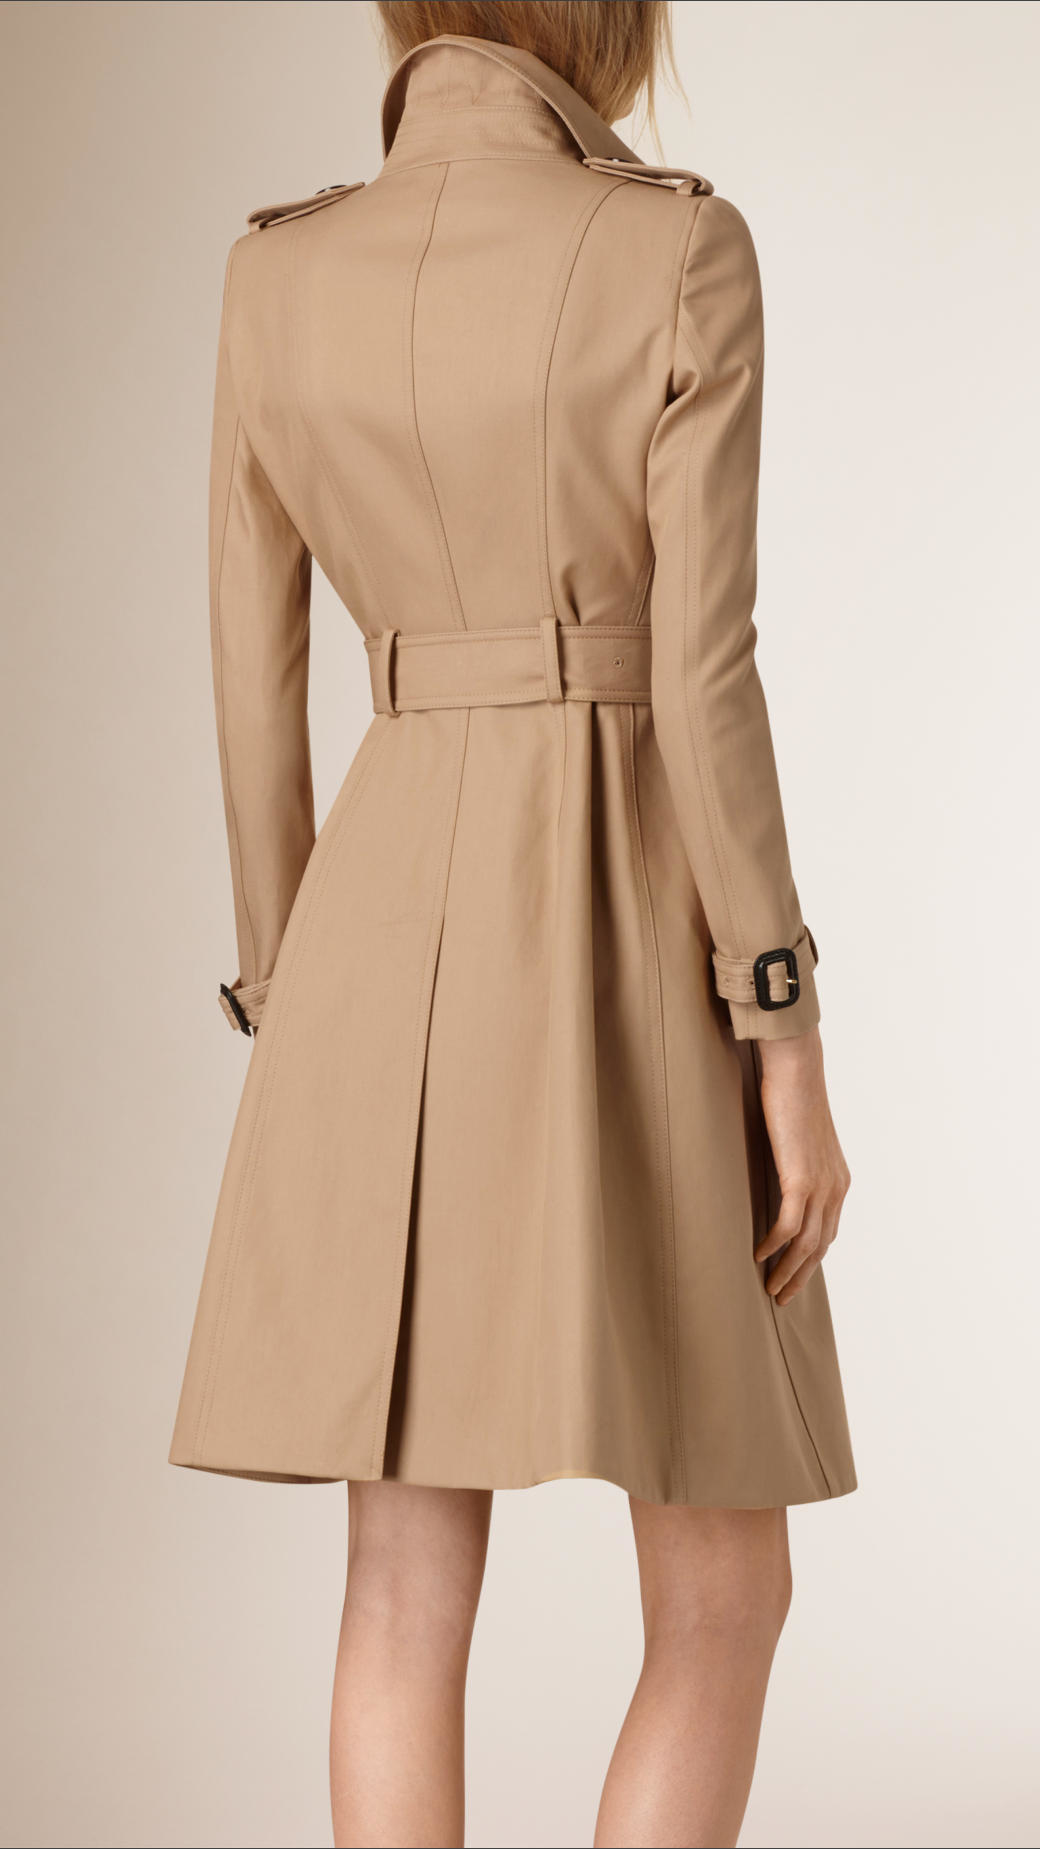 Lyst - Burberry Tapered Waist Cotton Gabardine Trench Coat in Natural